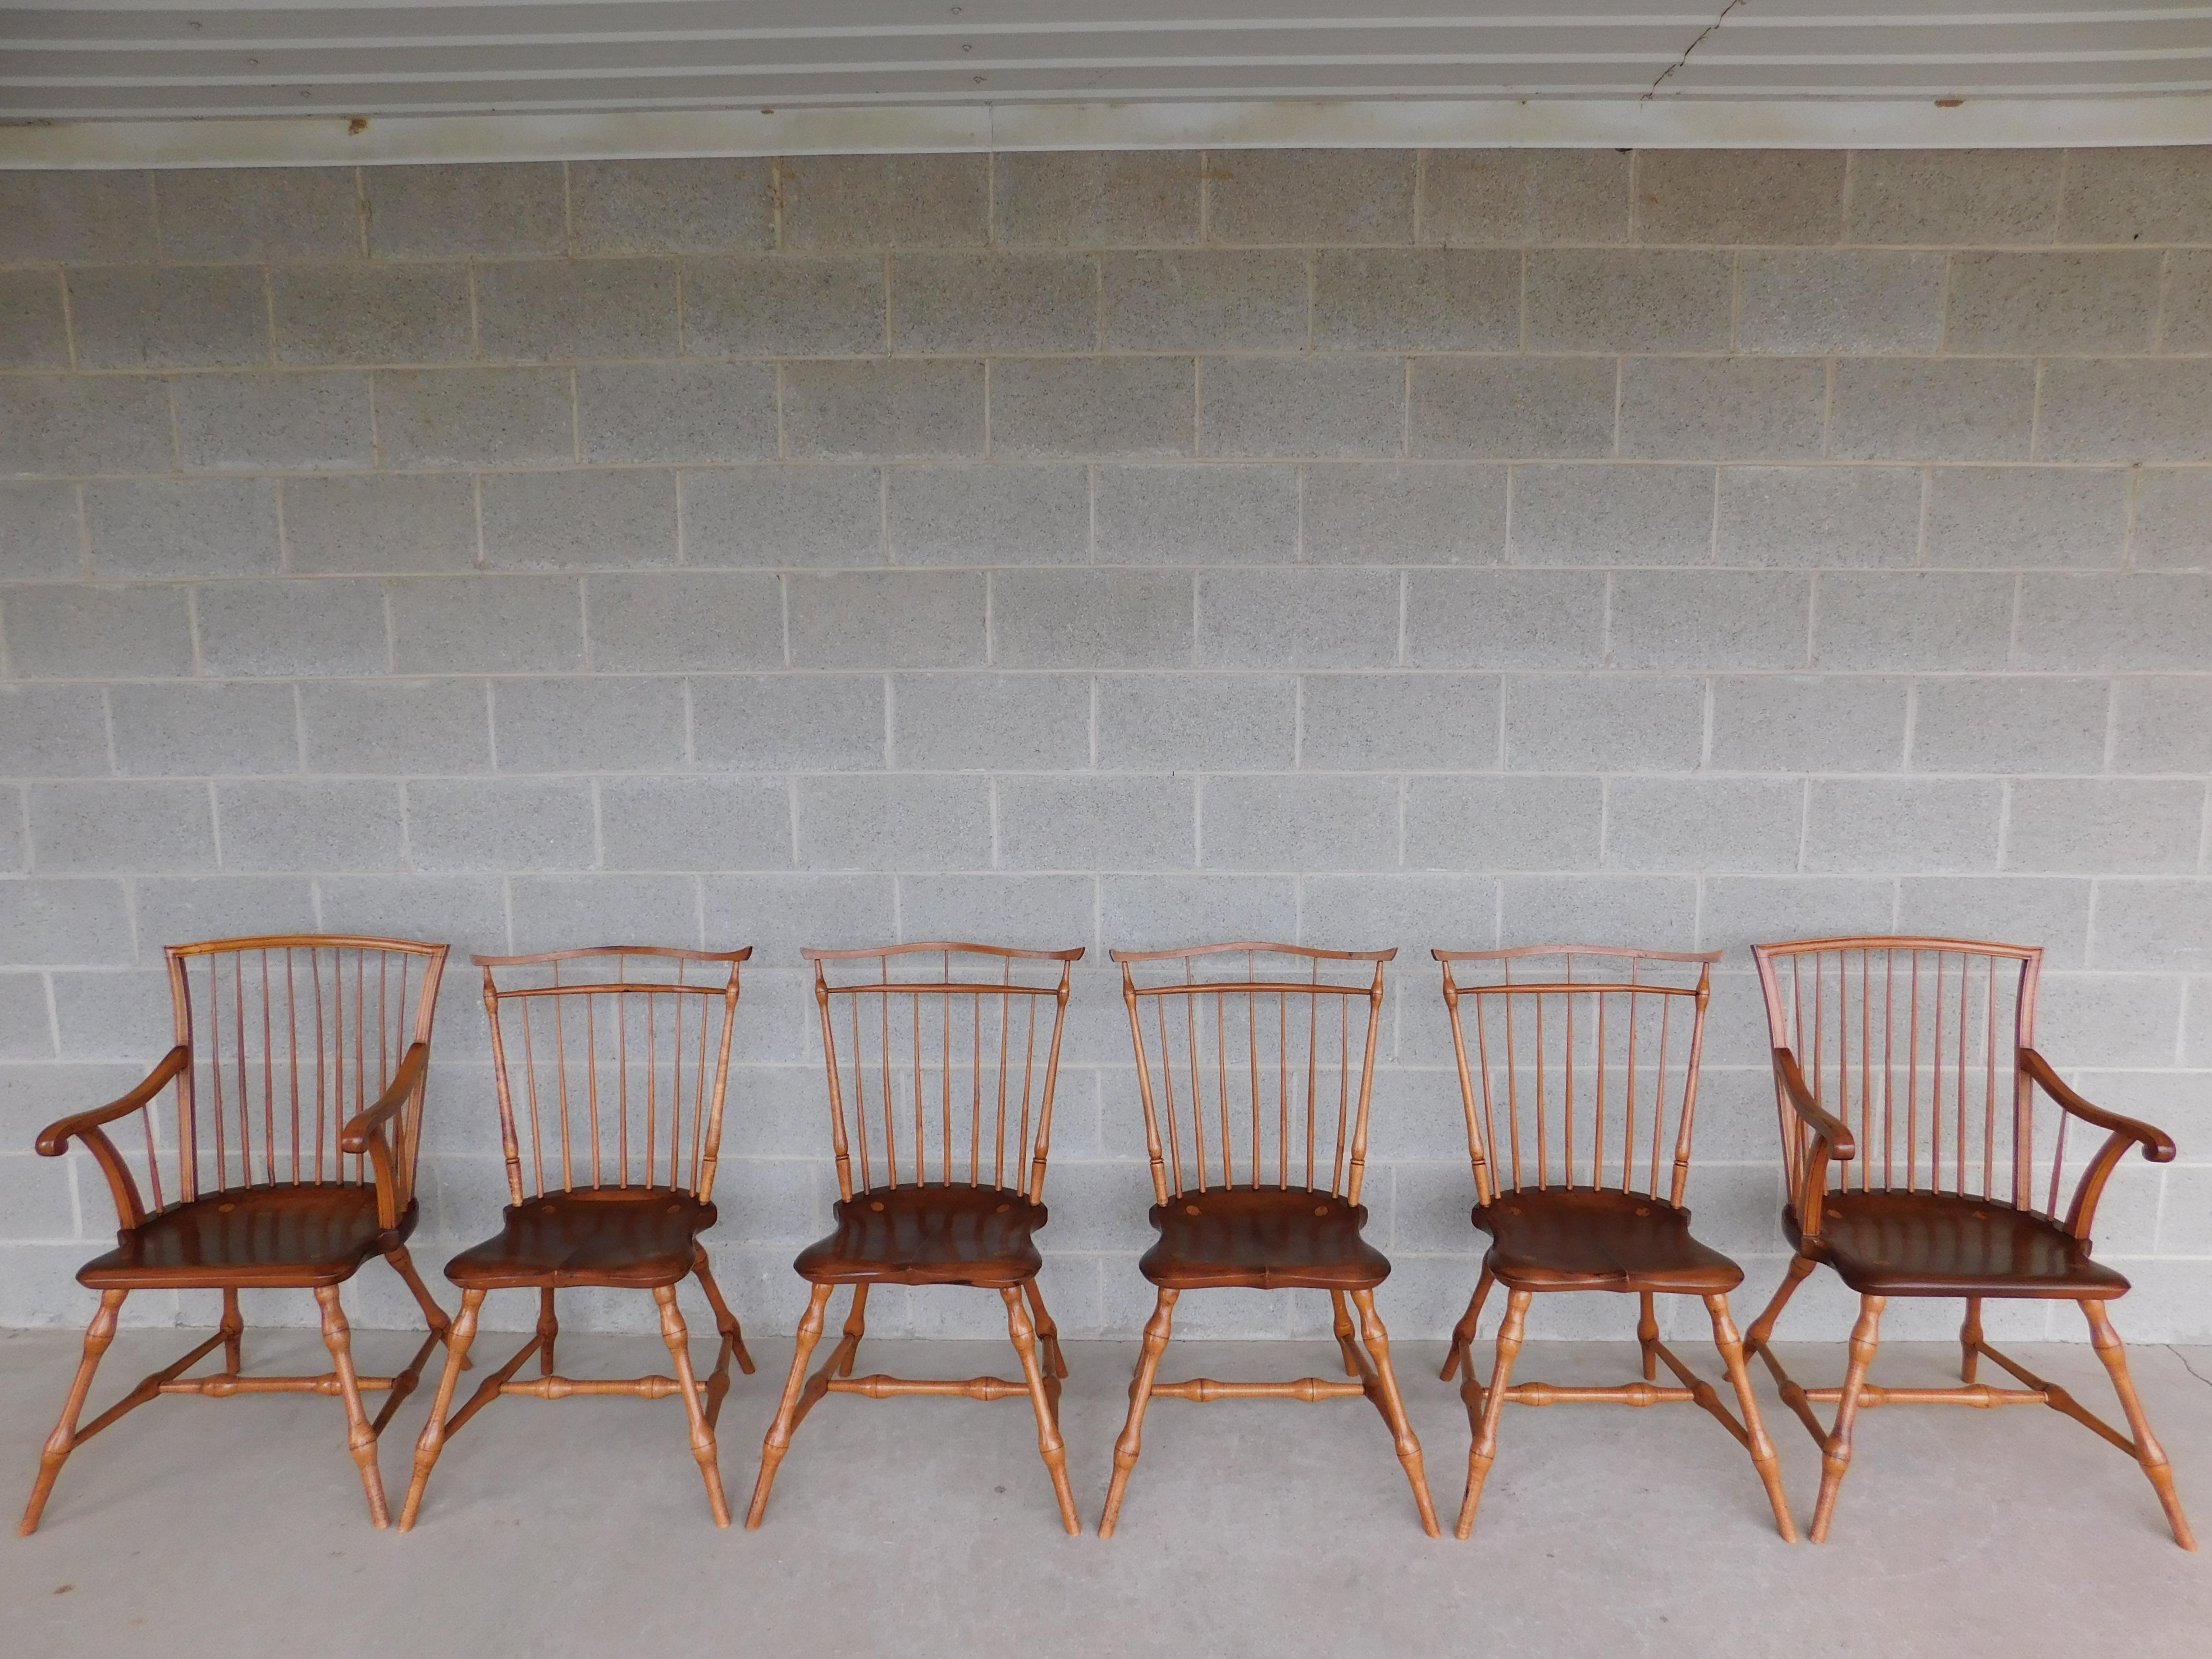 Vintage Bird Cage Windsor Chairs, Set of 6 by Marlow of York Pa For Sale 11